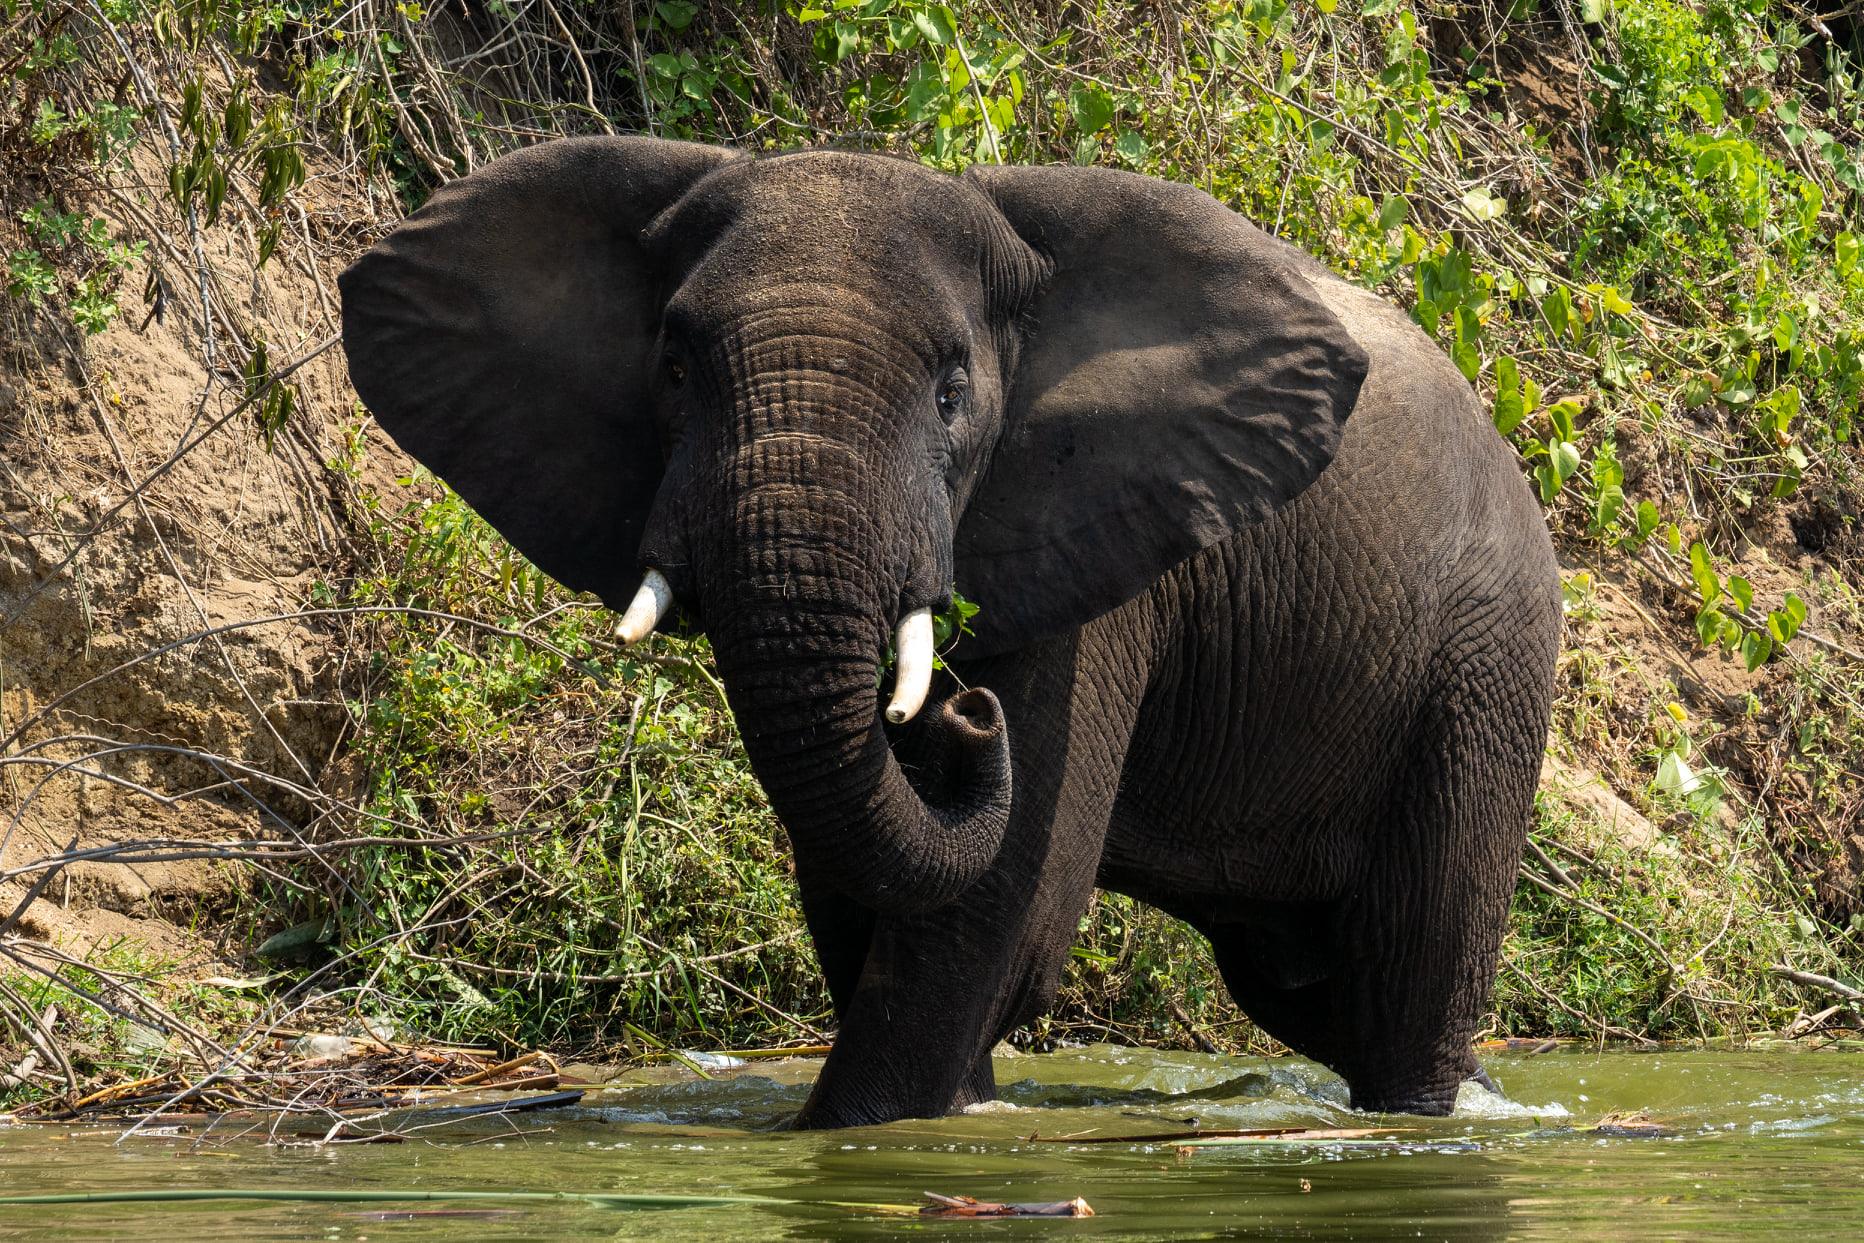 The best wildlife filming locations in the Democratic Republic of Congo